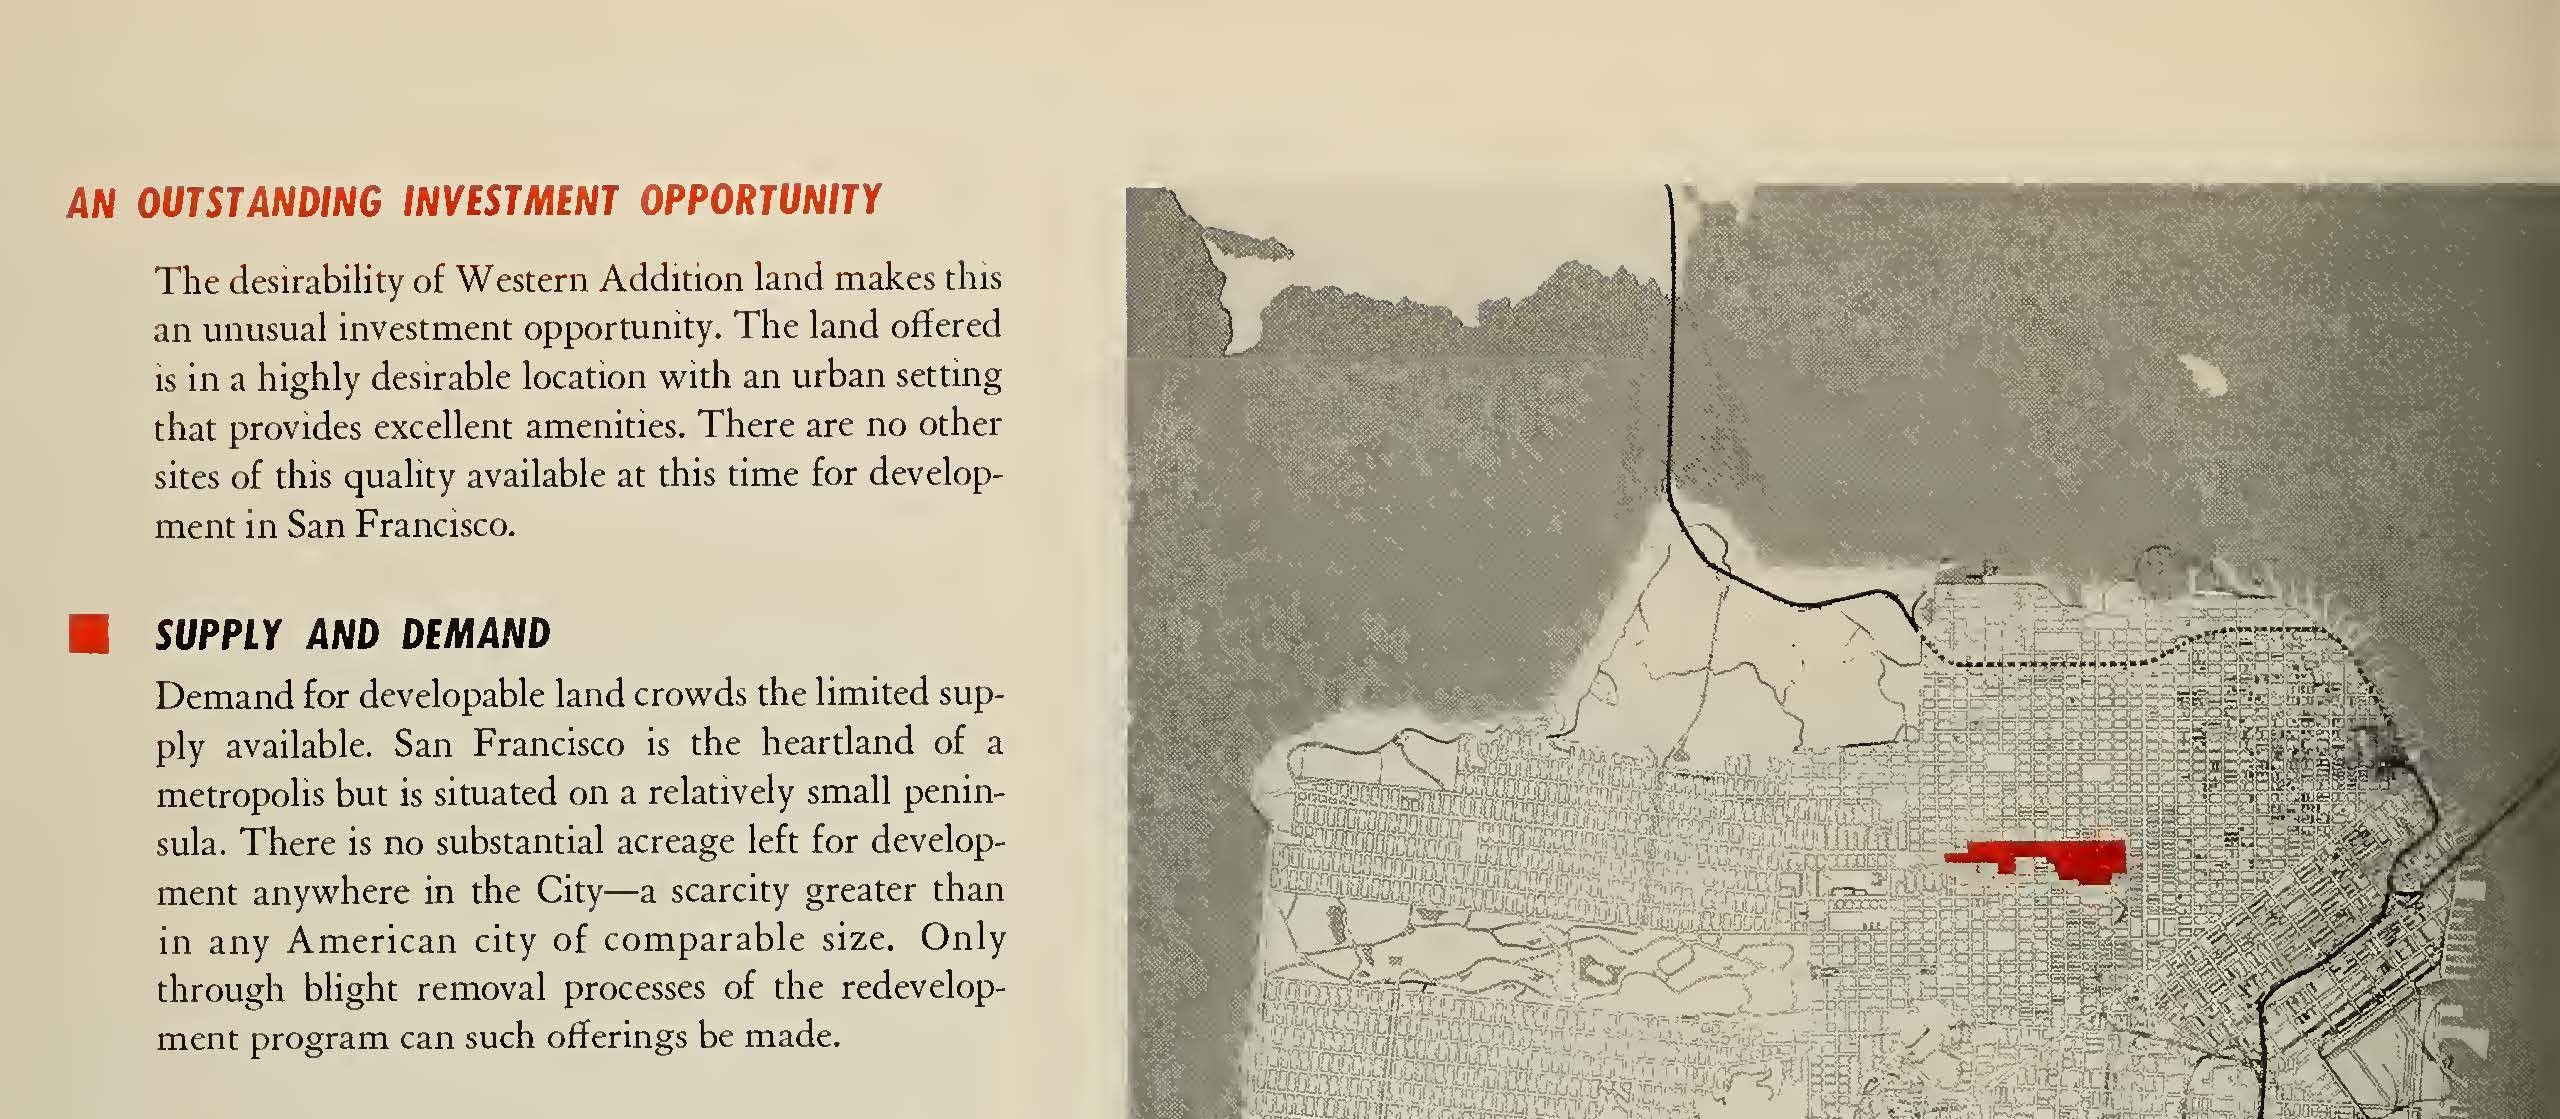 Excerpt from a page from the San Francisco Redevelopment Agency’s 1960 brochure advertising land for sale in the Western Addition through the urban renewal program. Courtesy of San Francisco History Center, San Francisco Public Library